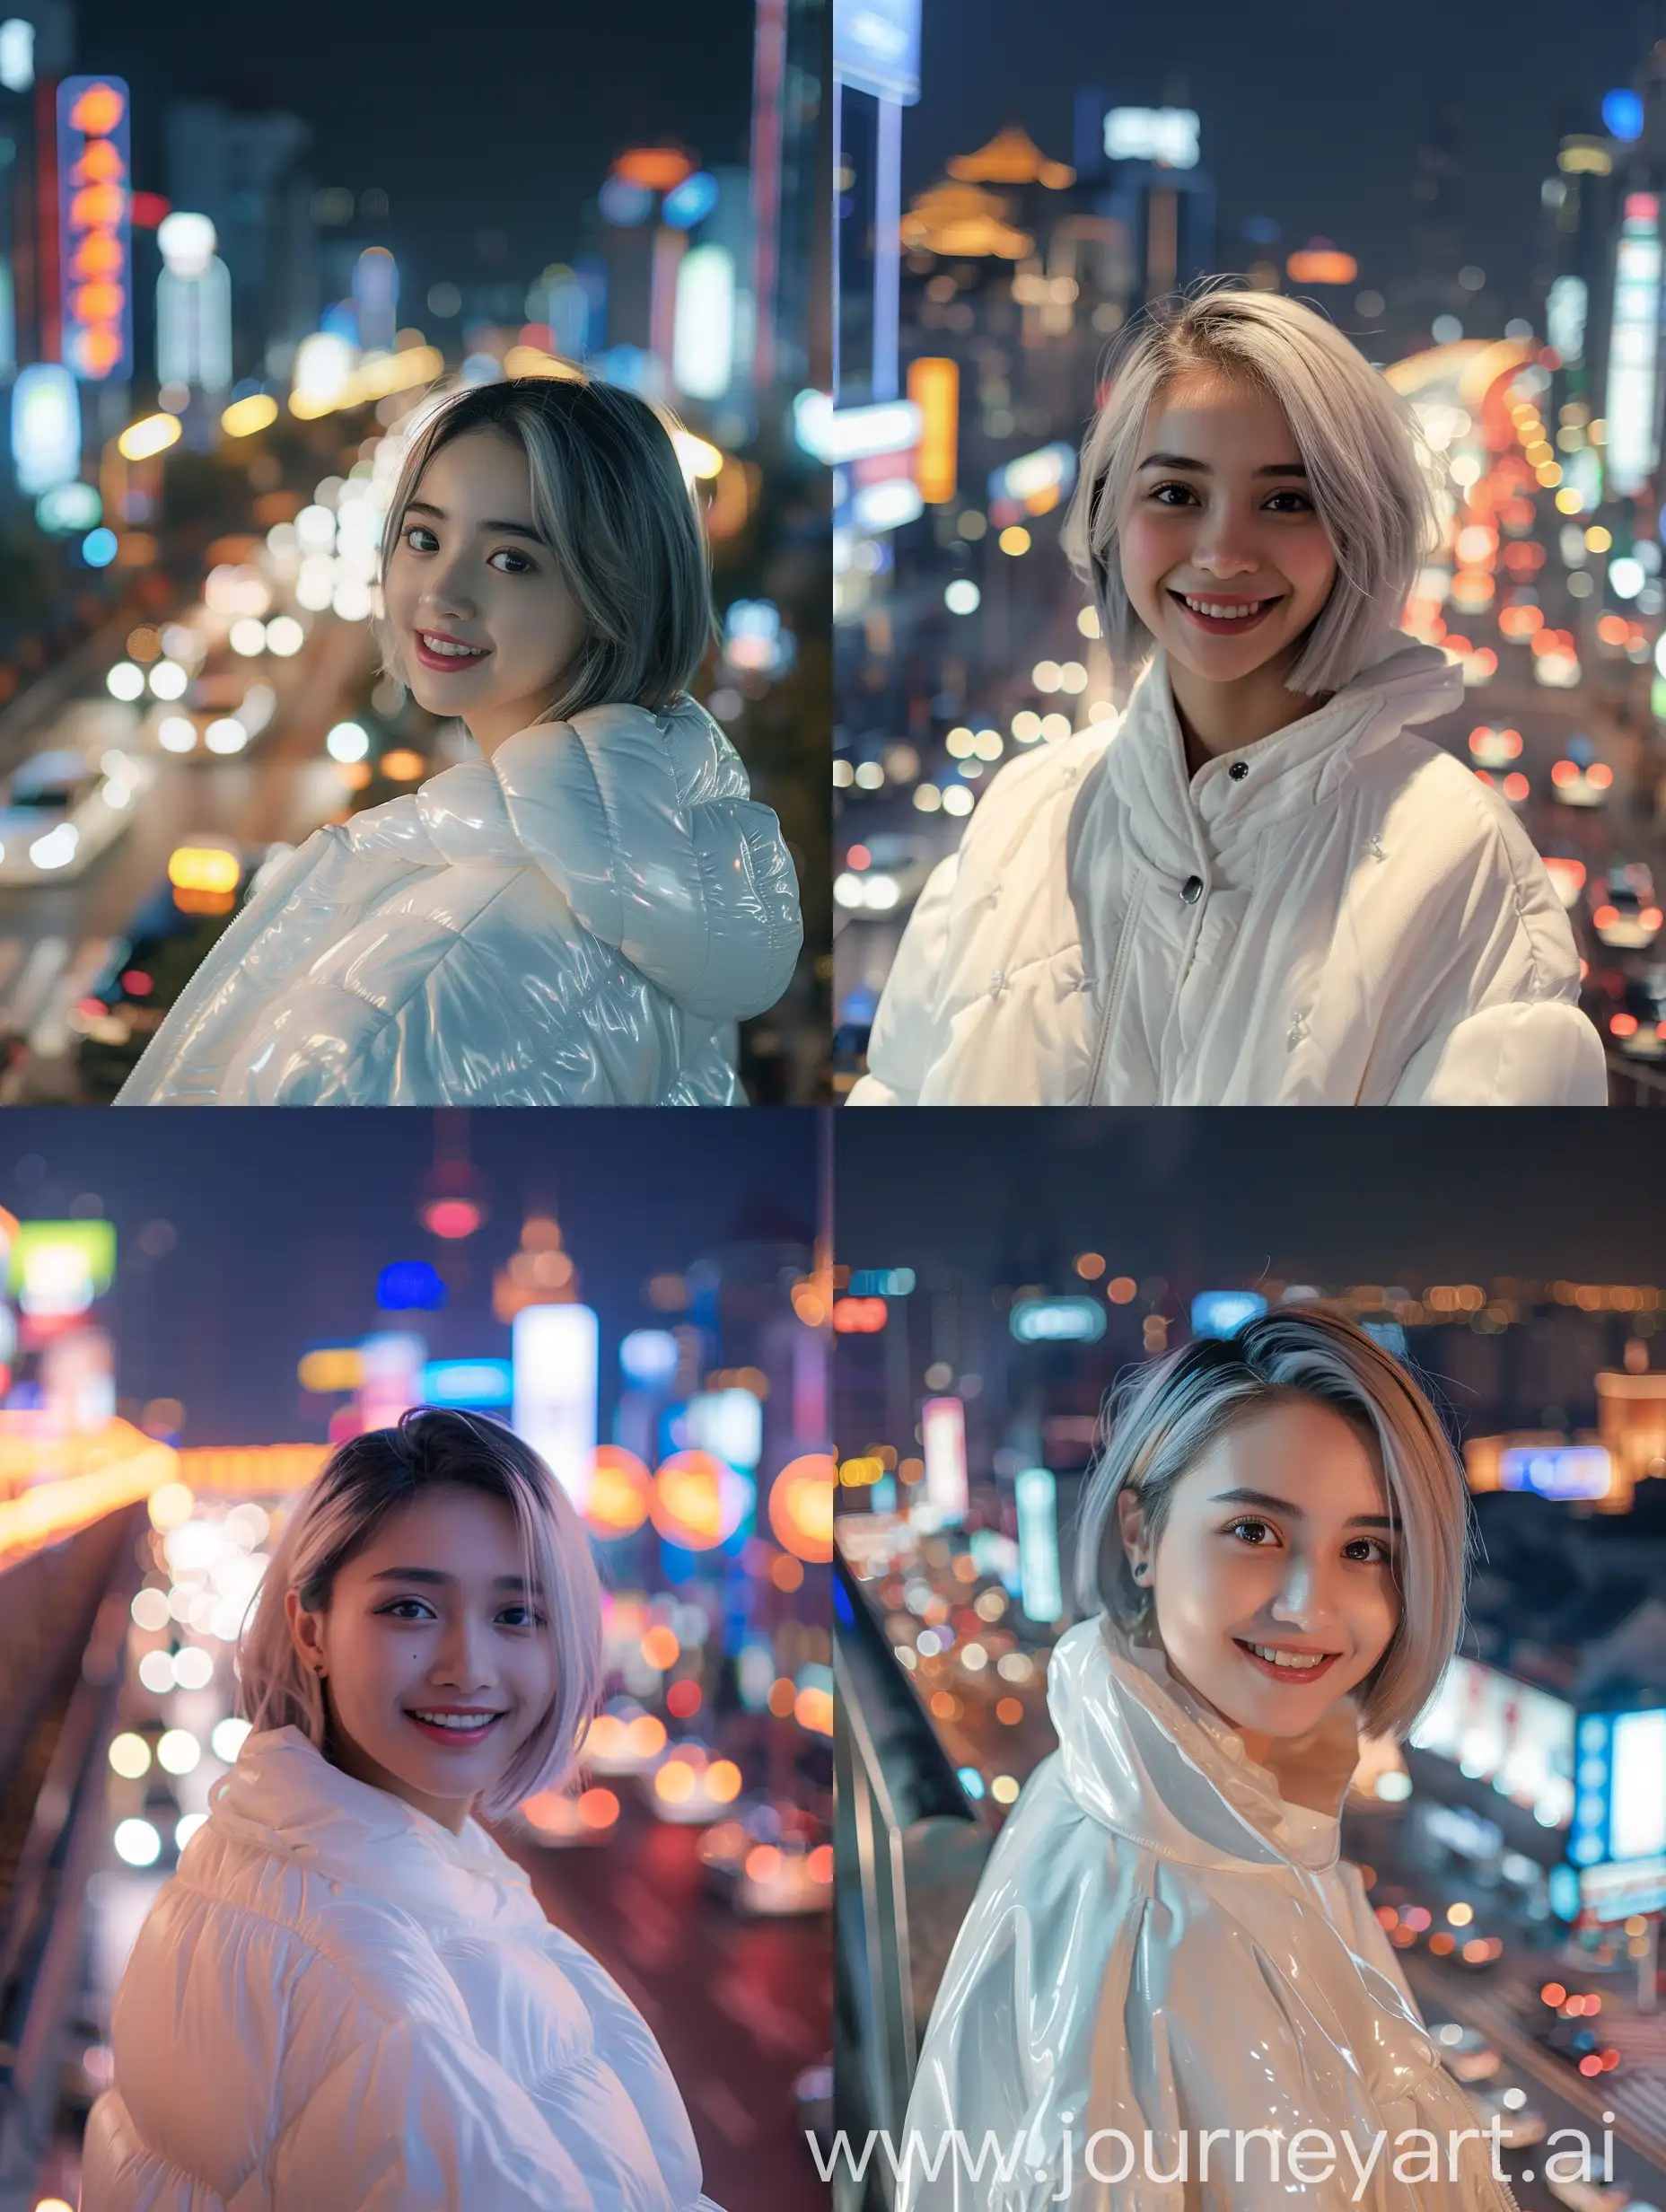 Smiling-Indonesian-Woman-in-White-Bubble-Jacket-with-Night-Cityscape-Background